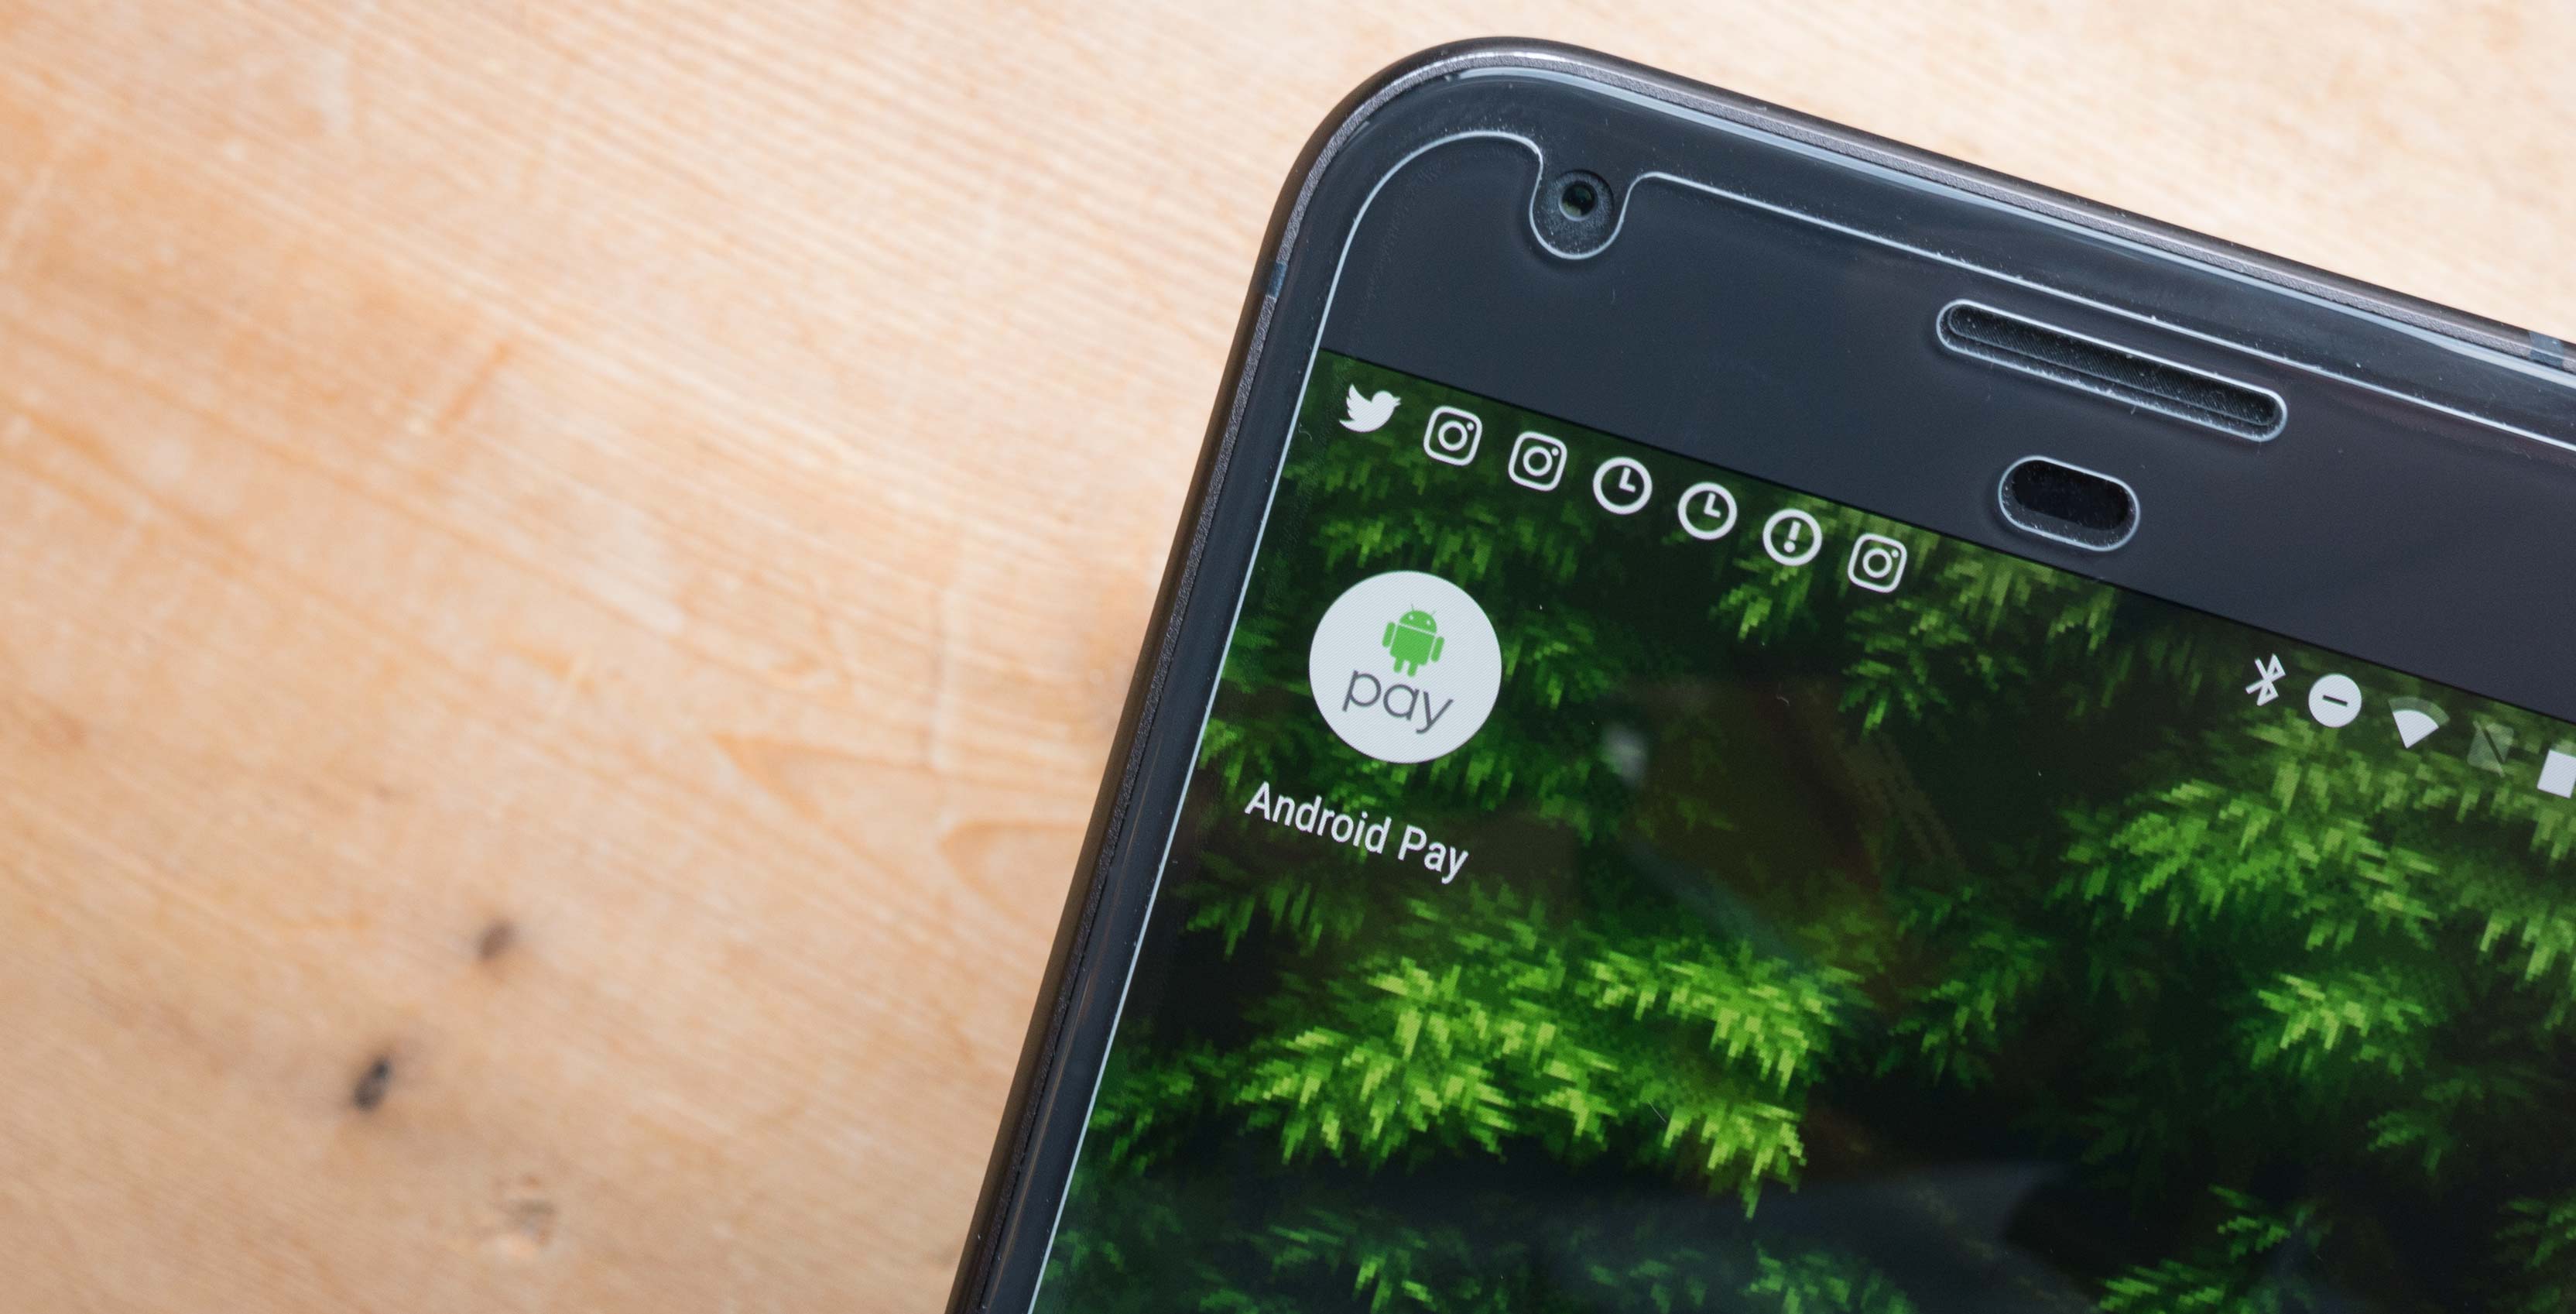 Android Pay app icon on Android